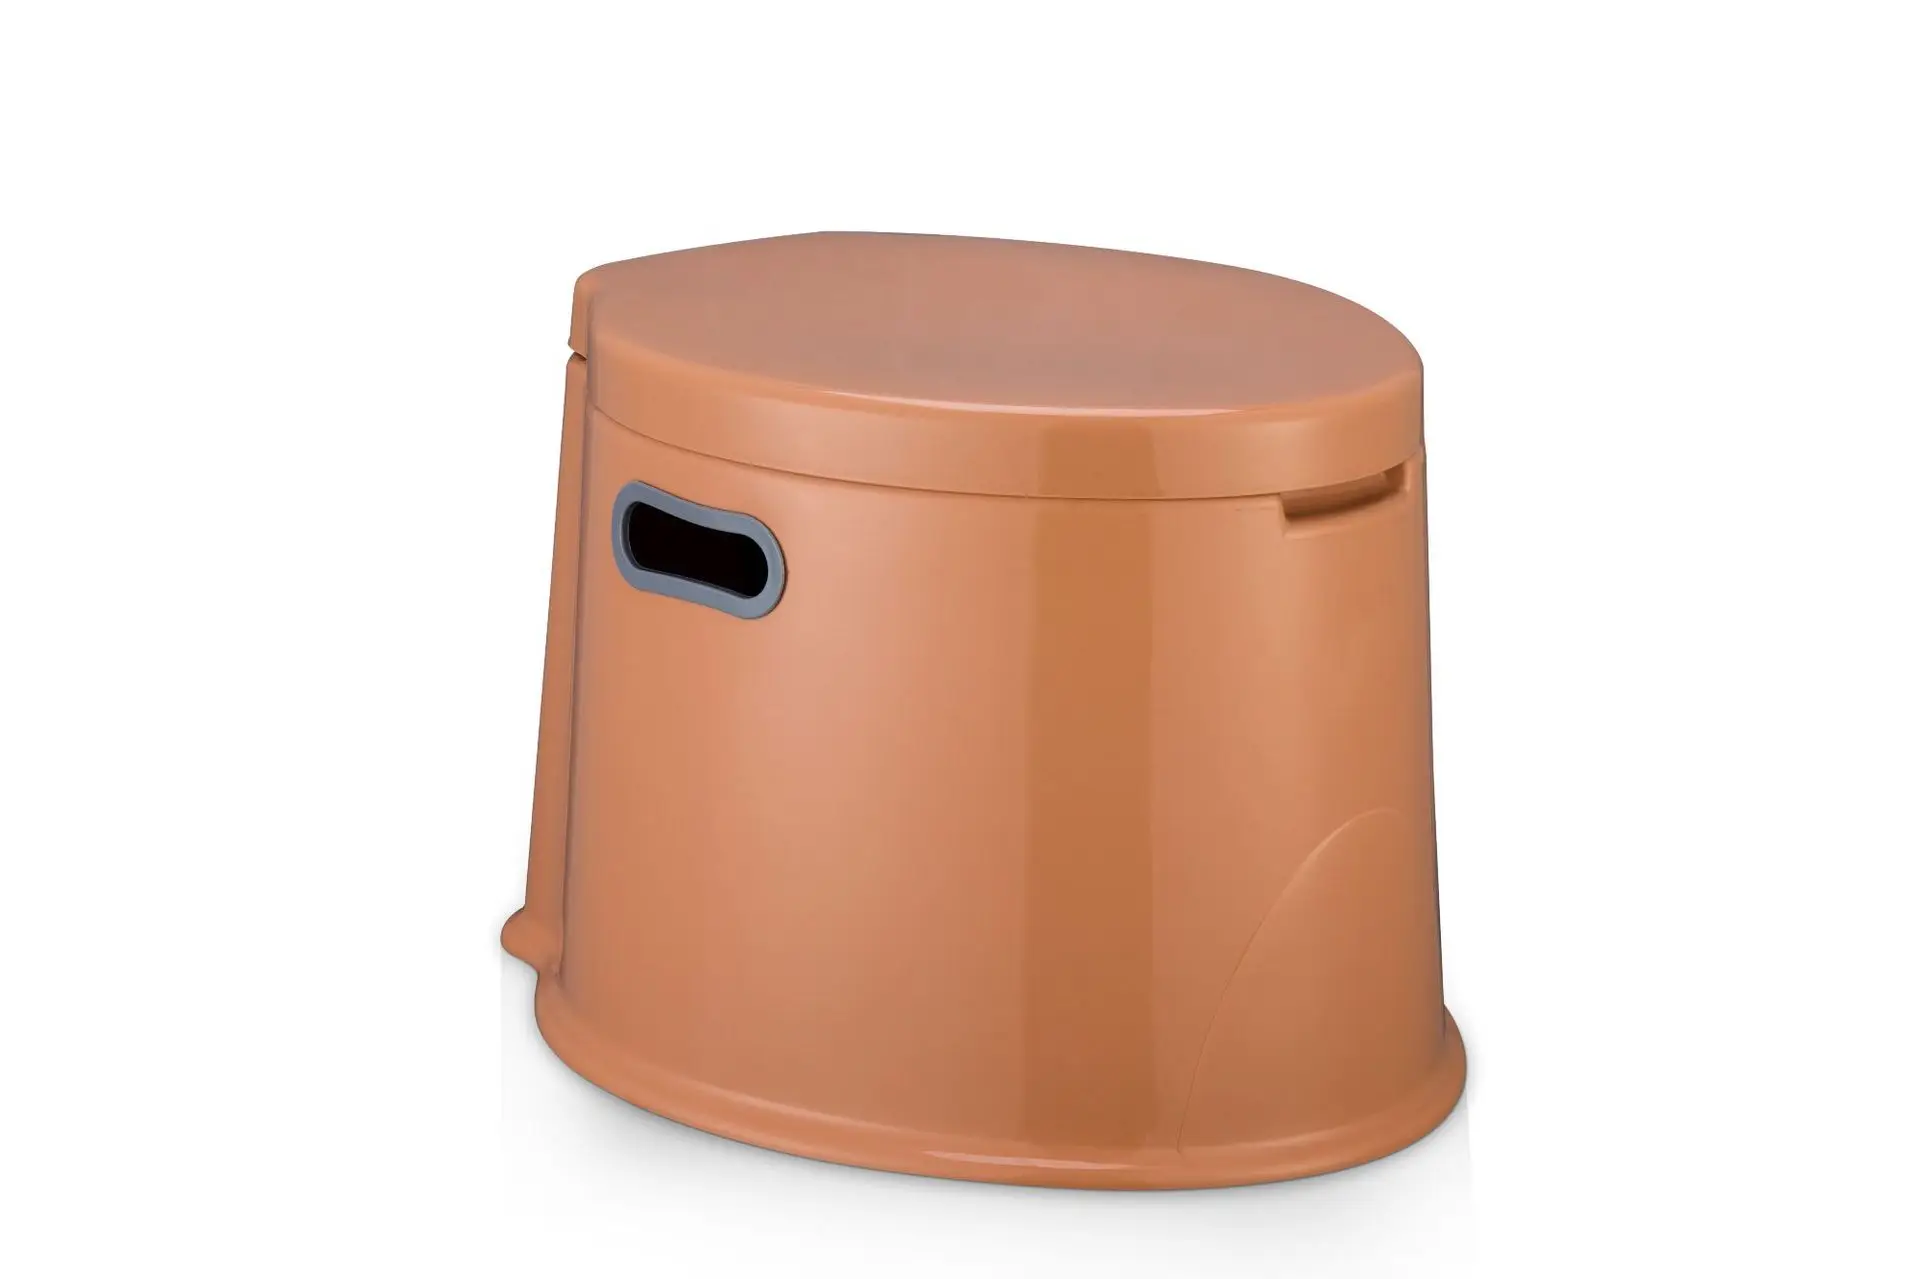 

Portable Toilet Potty Commode Flush for the Elderly Travel Camping Hiking Outdoor Assists Disabled Elderly or Handicapped